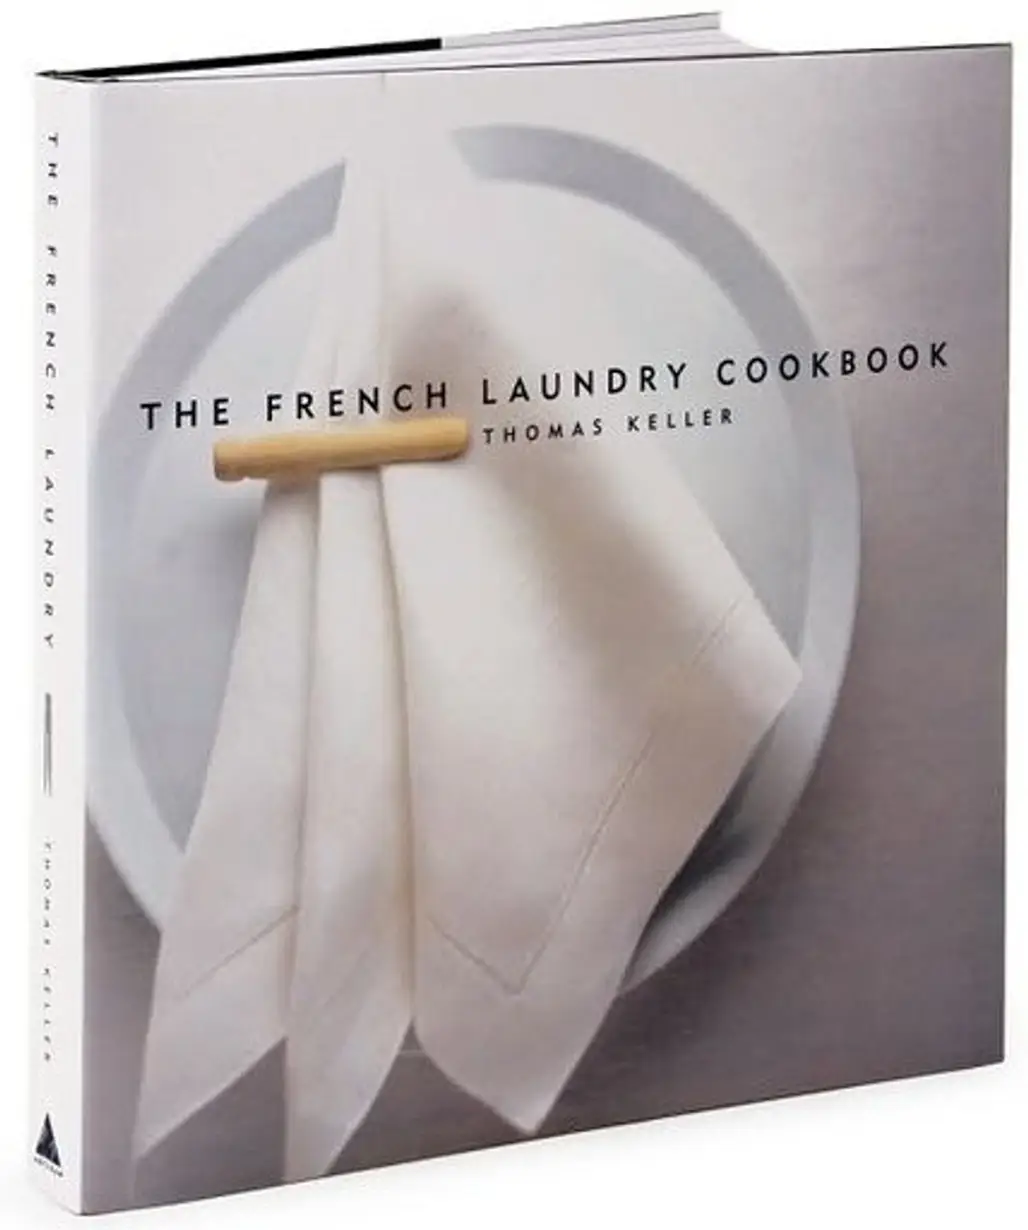 The French Laundry Cookbook [Hardcover]